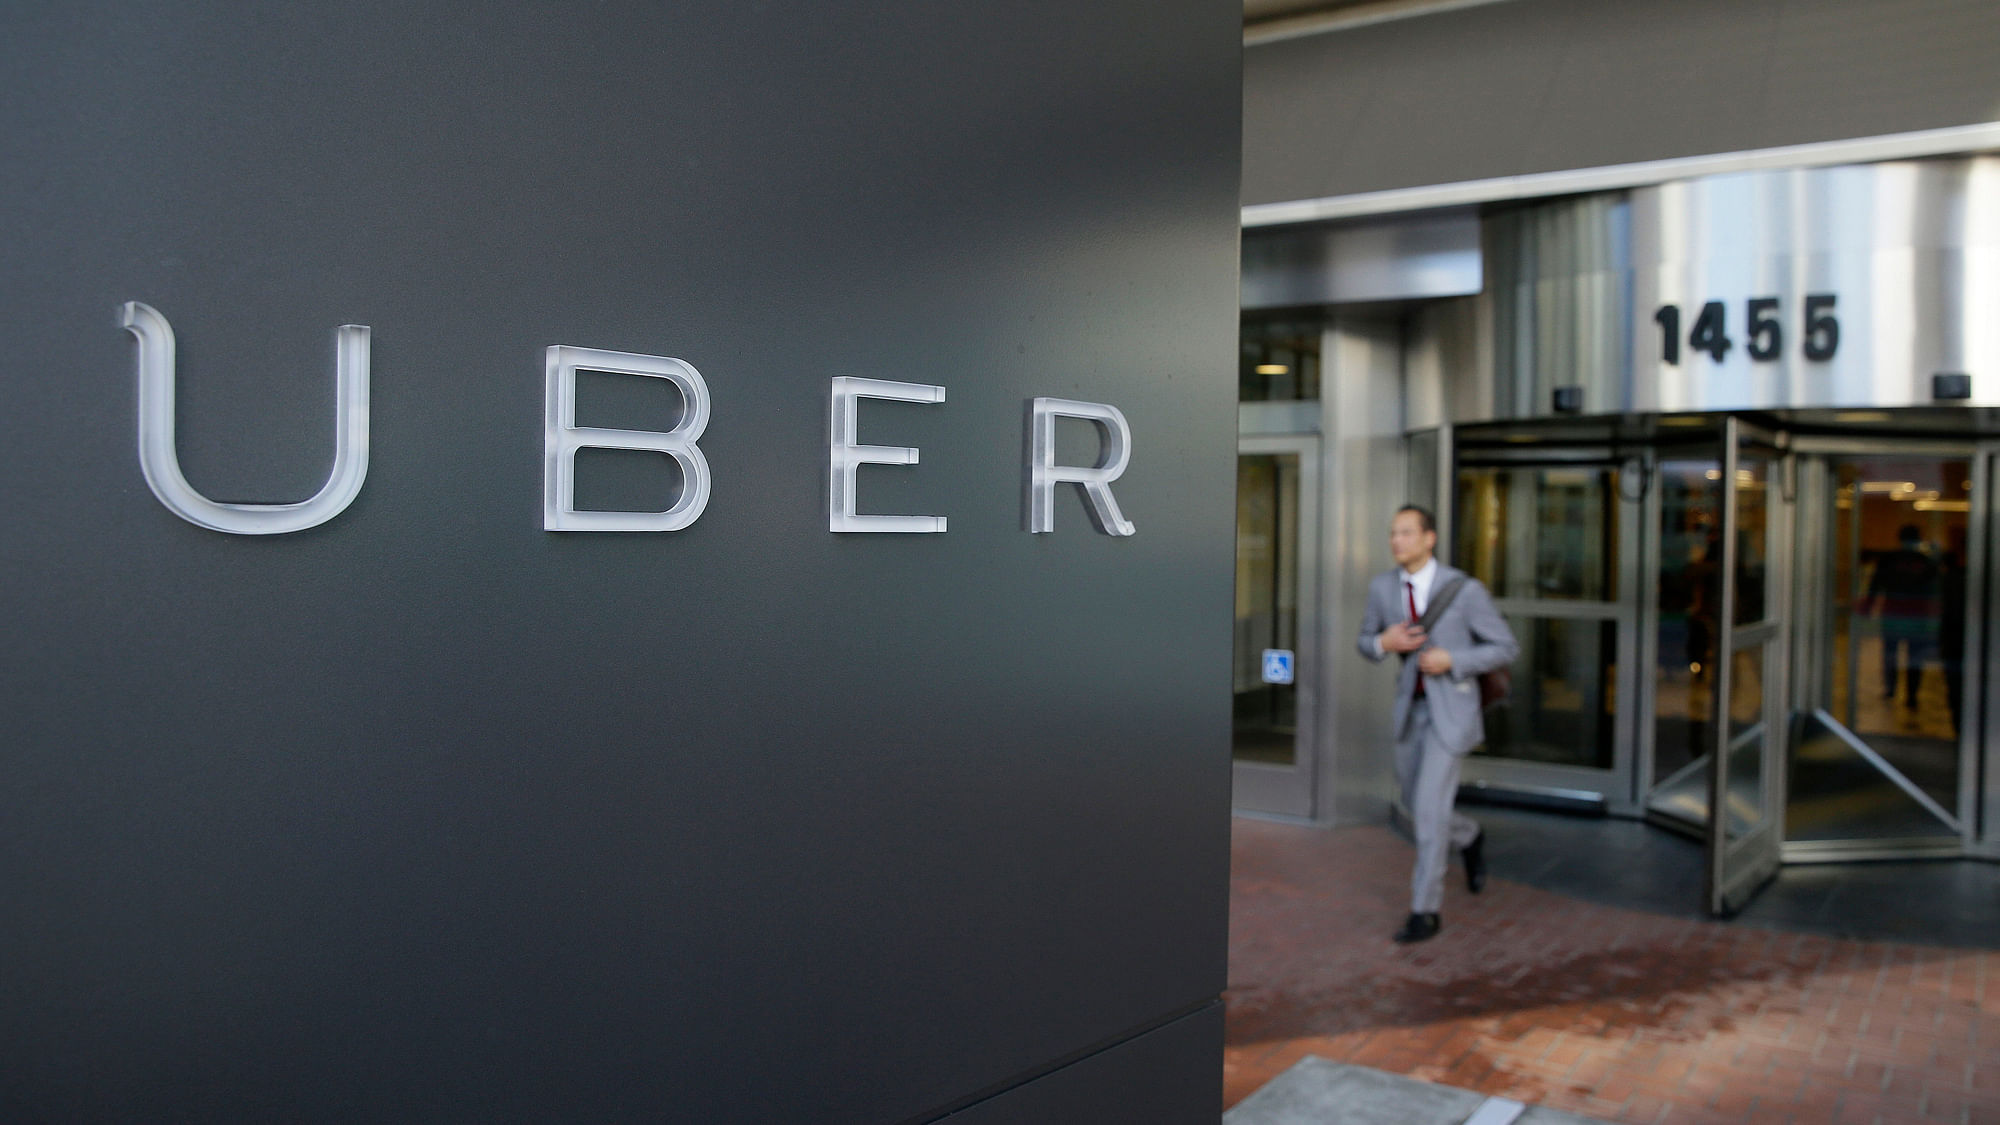 Initially, it was speculated that Uber could be valued at $120 billion during its initial public offering.